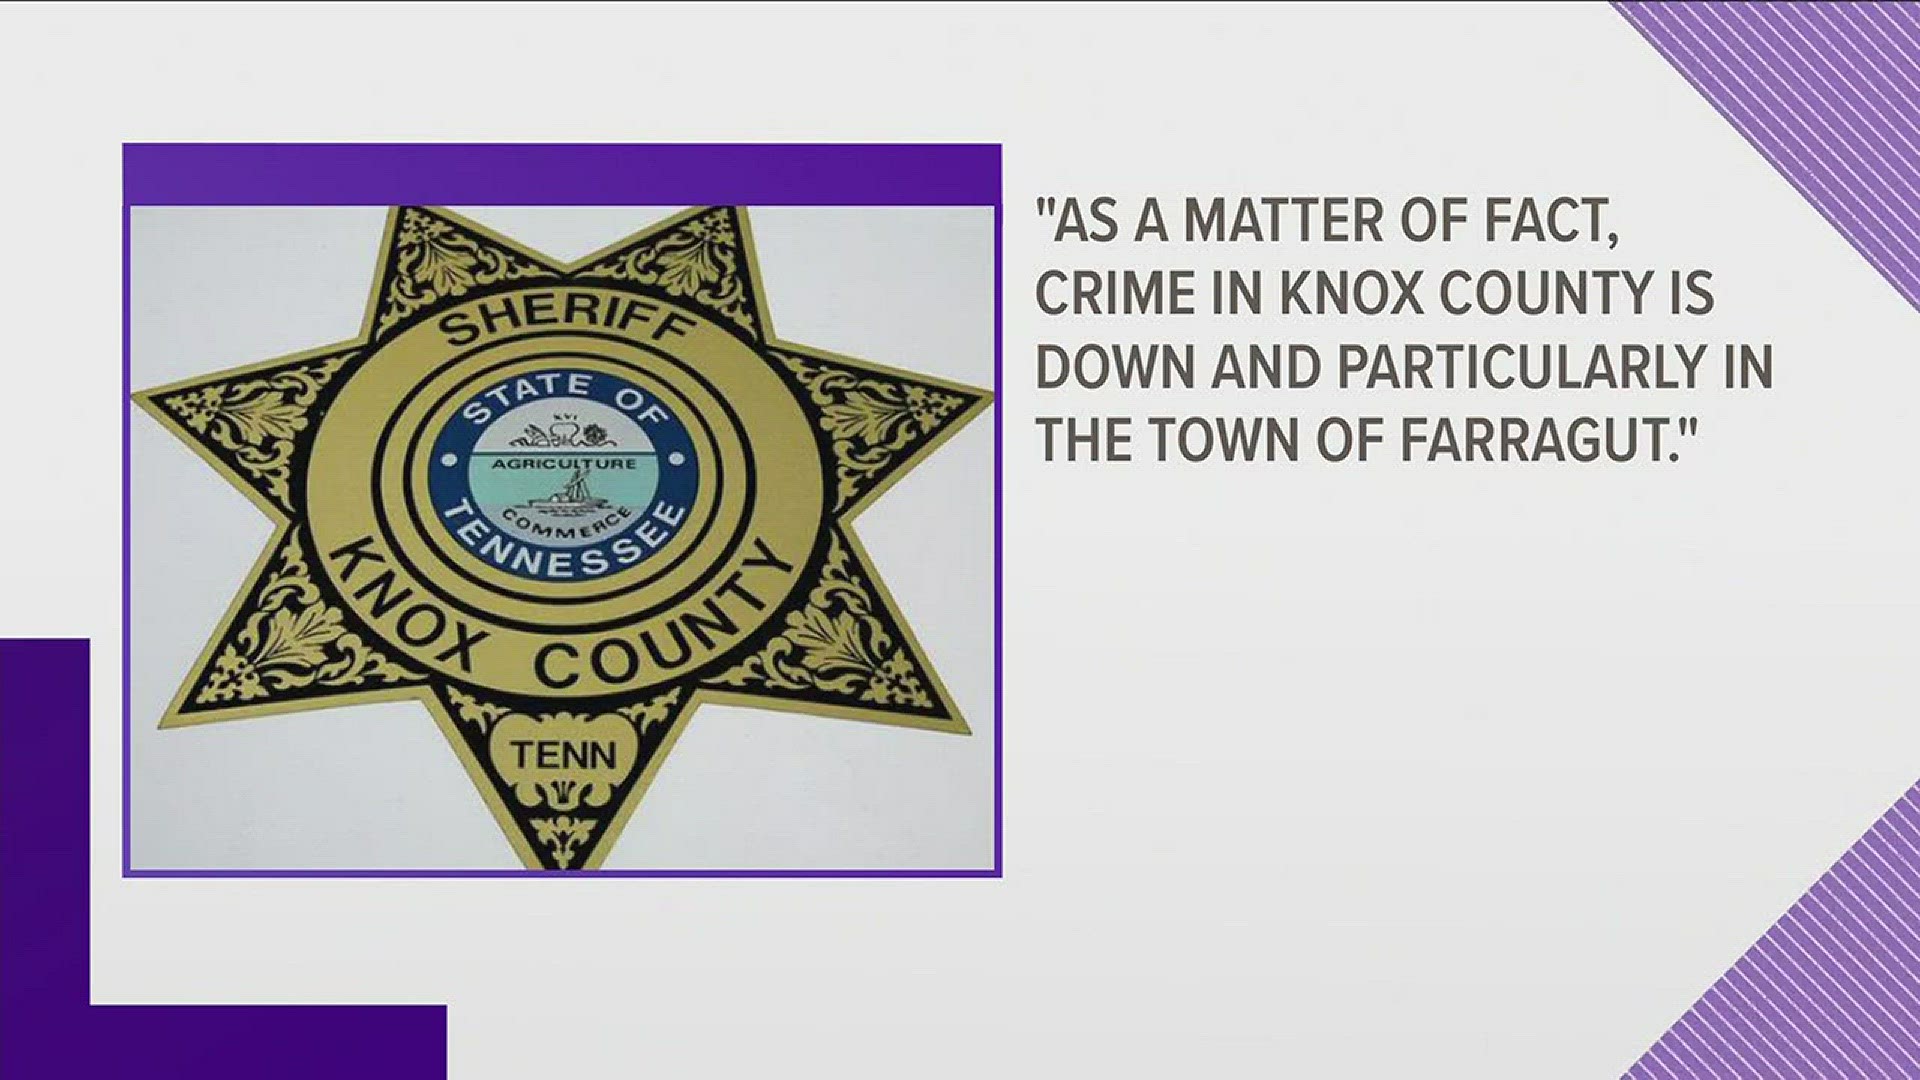 March 16, 2018: The Knox County Sheriff's Office is calling a claim by the Farragut mayor about crime rates "a lie."